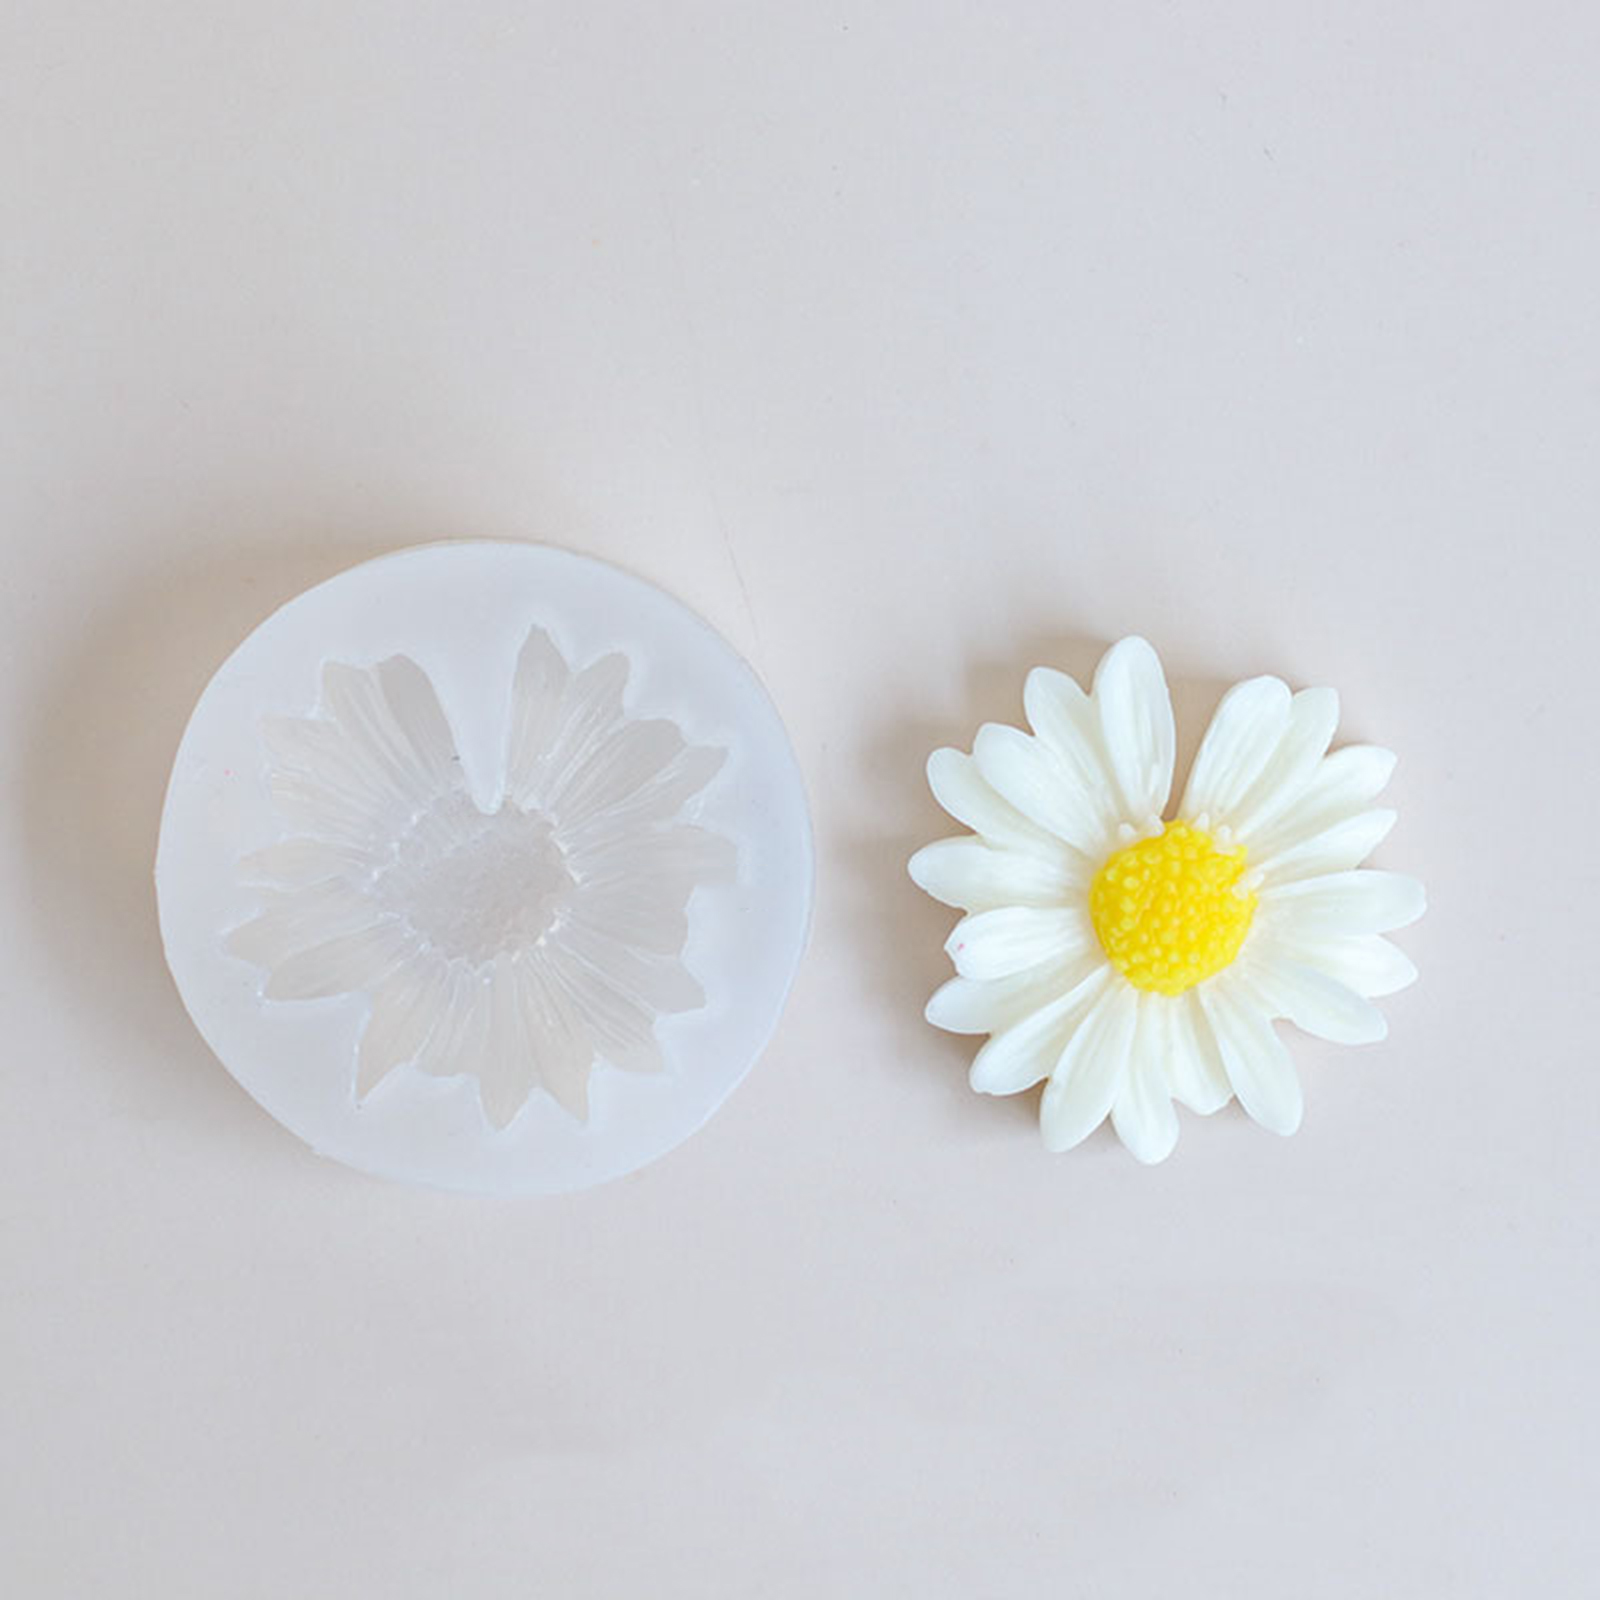 Picture of Silicone Resin Mold For Jewelry Making Handmade soap Without Holes Chrysanthemum Flower White 7cm Dia., 1 Piece